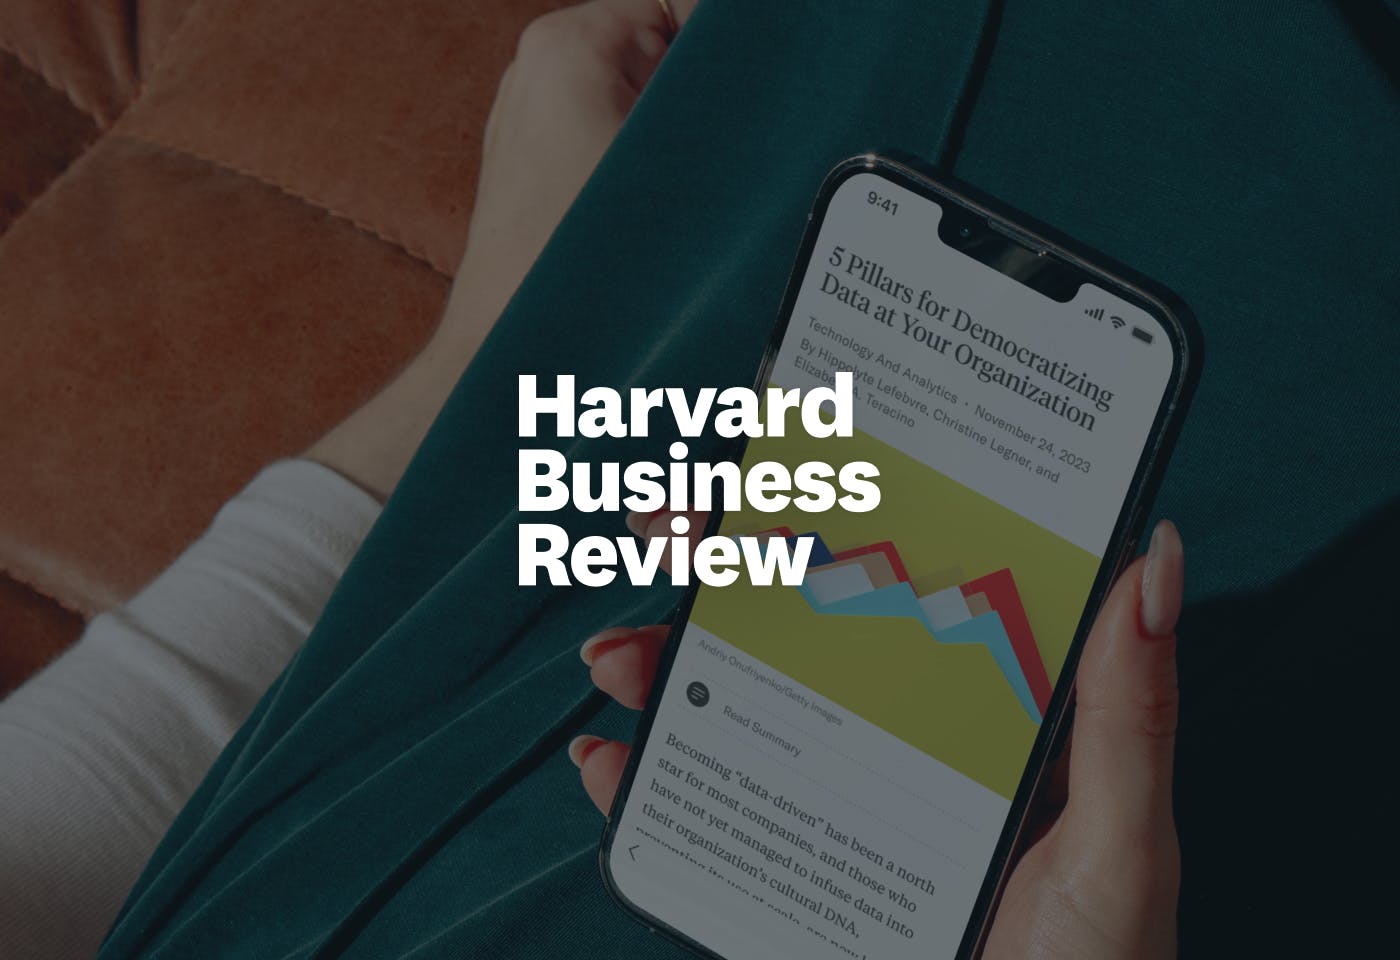 HBR logo in front of an image of a person holding a phone with the HBR mobile app.